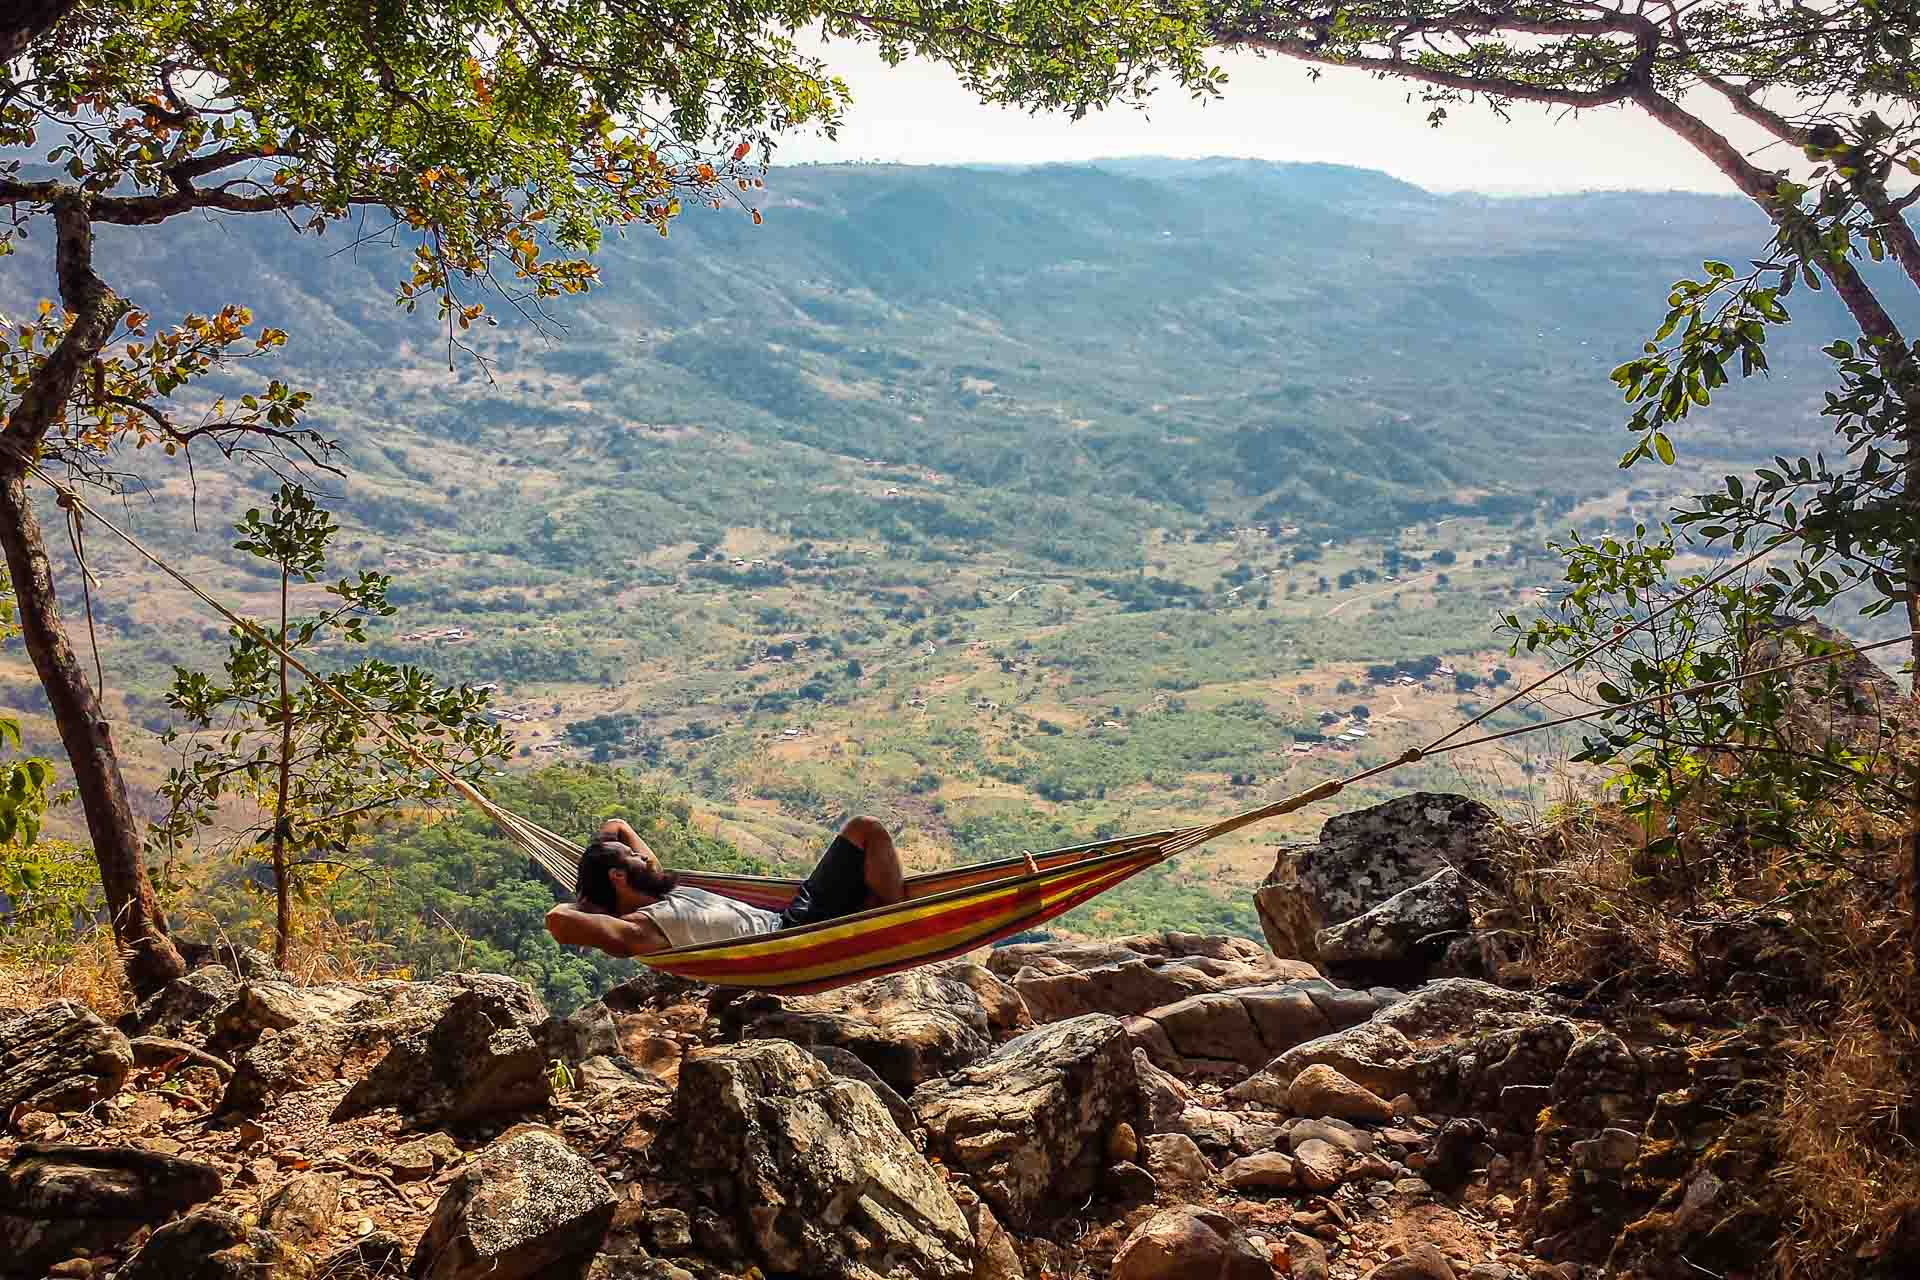 Tiago resting in a hammock in a cliff with a view of a valley underneath trees